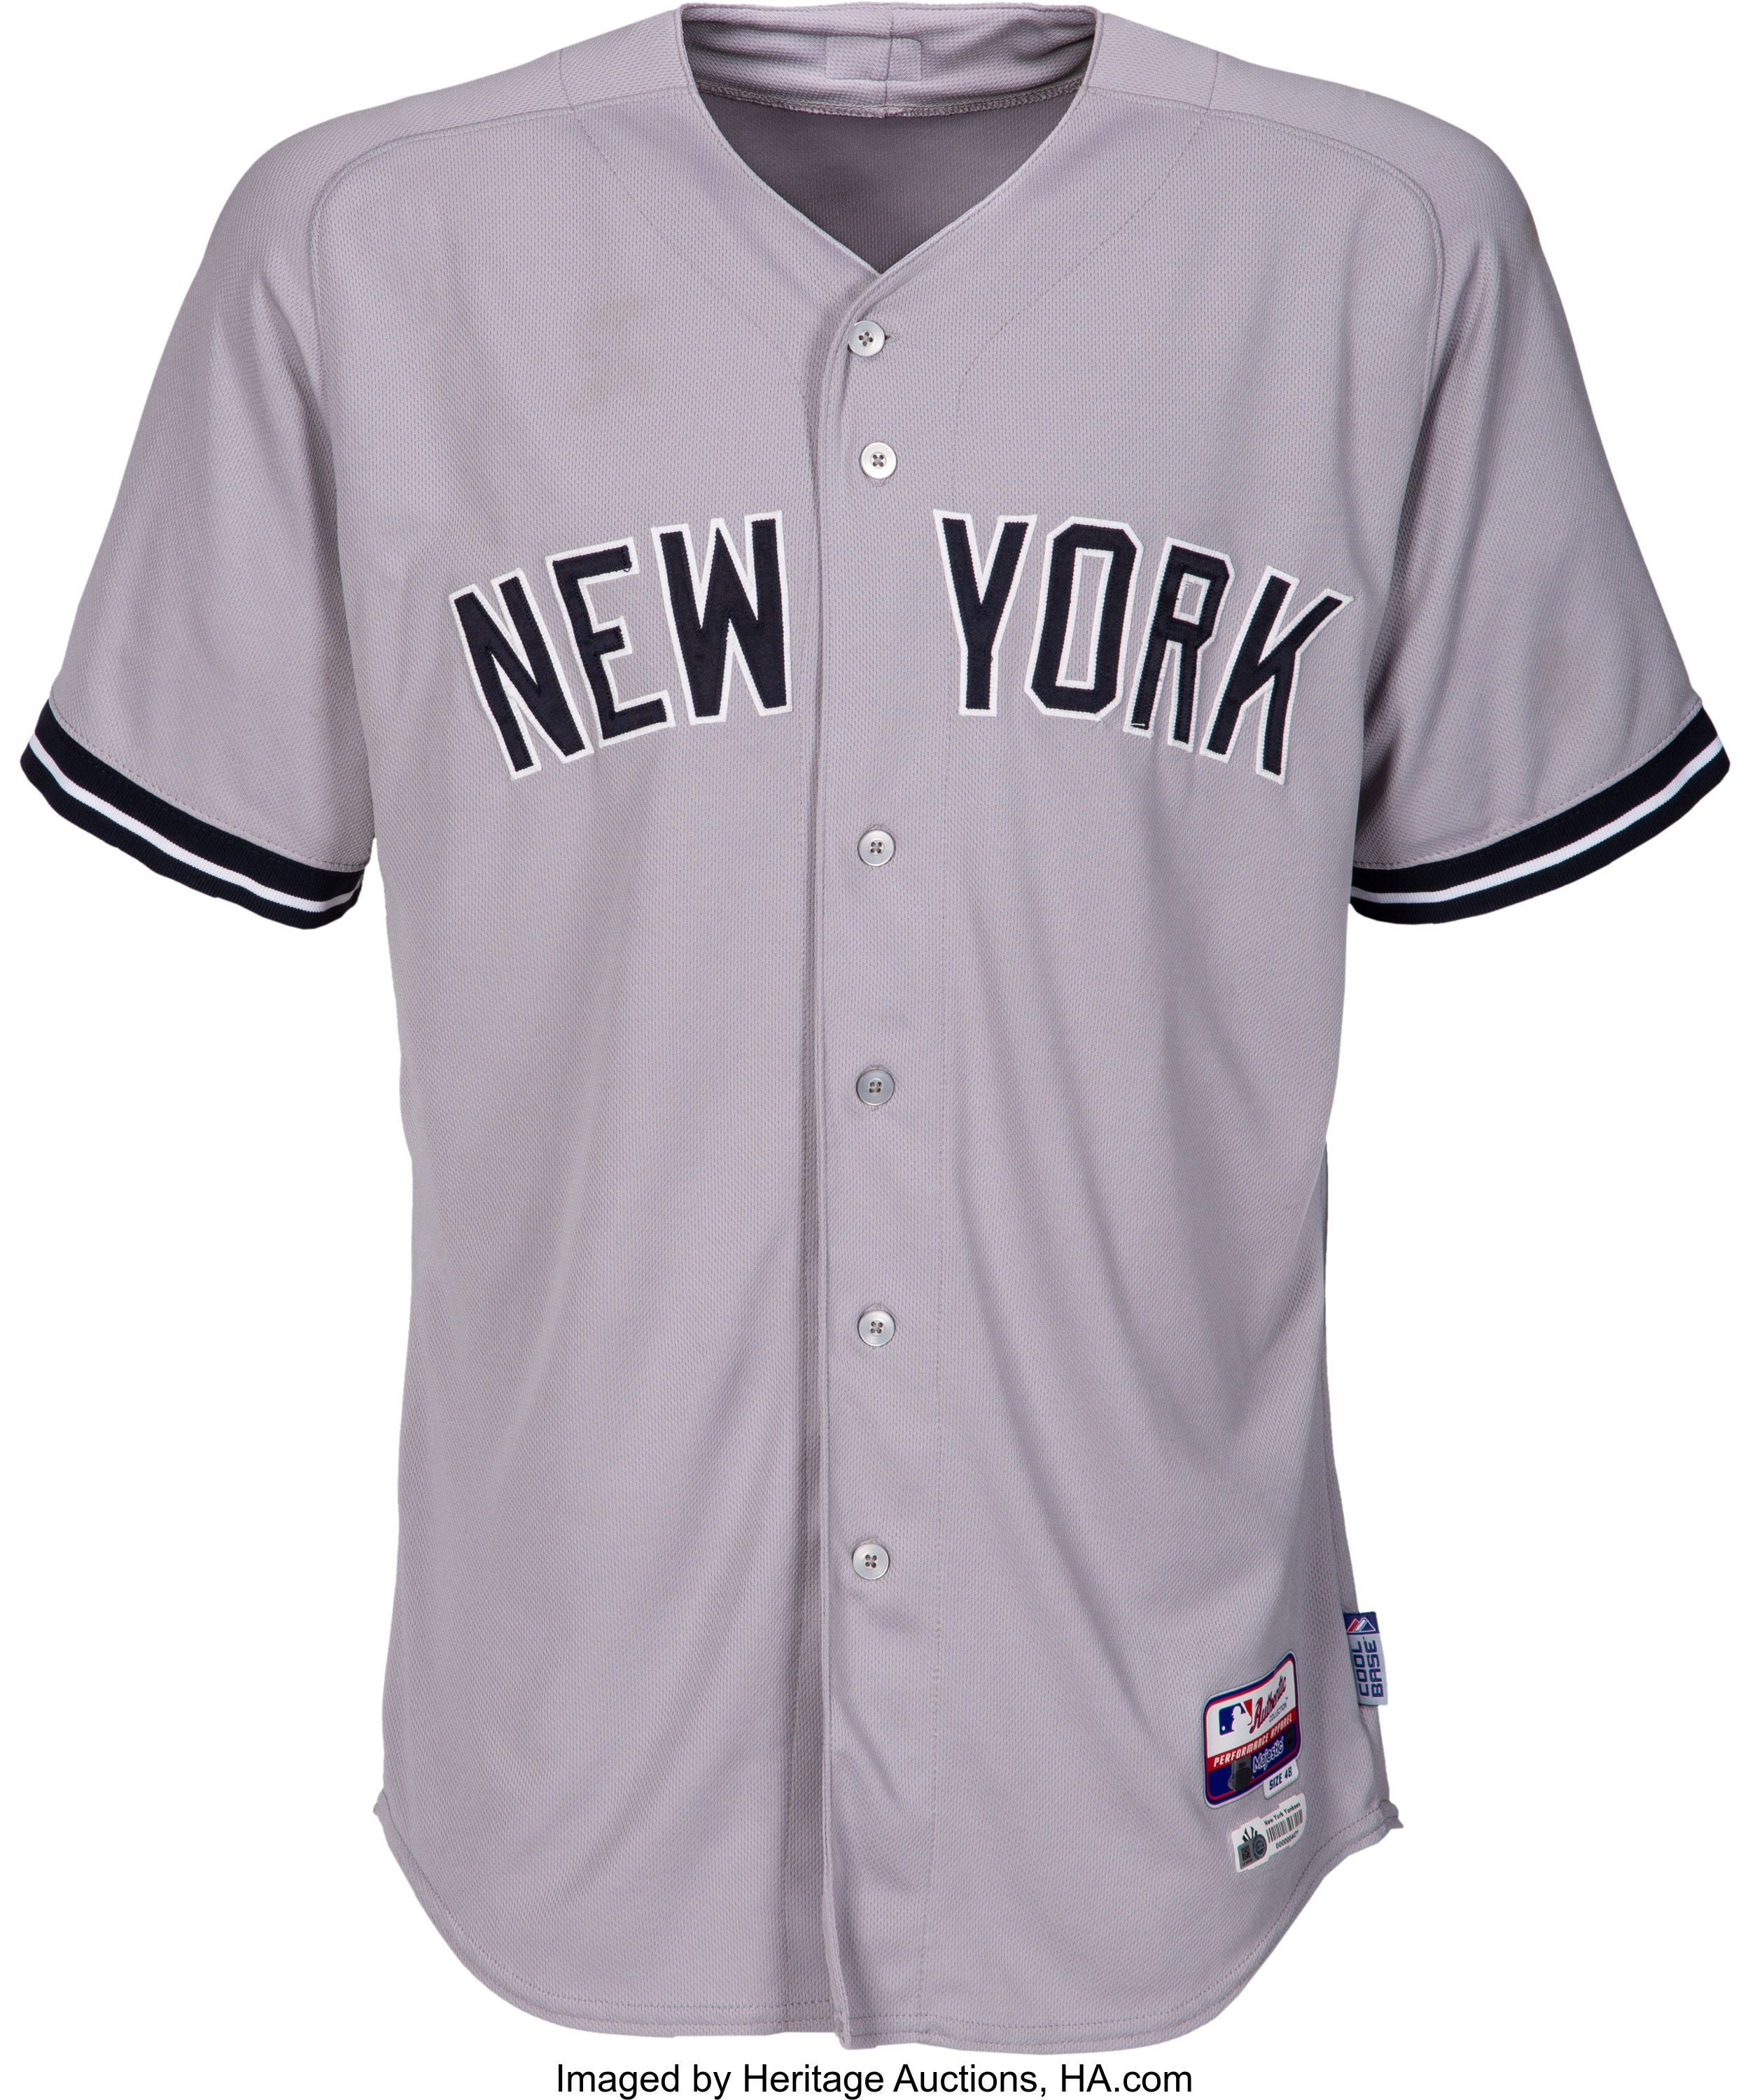 New York Yankees Game Used MLB Jerseys for sale